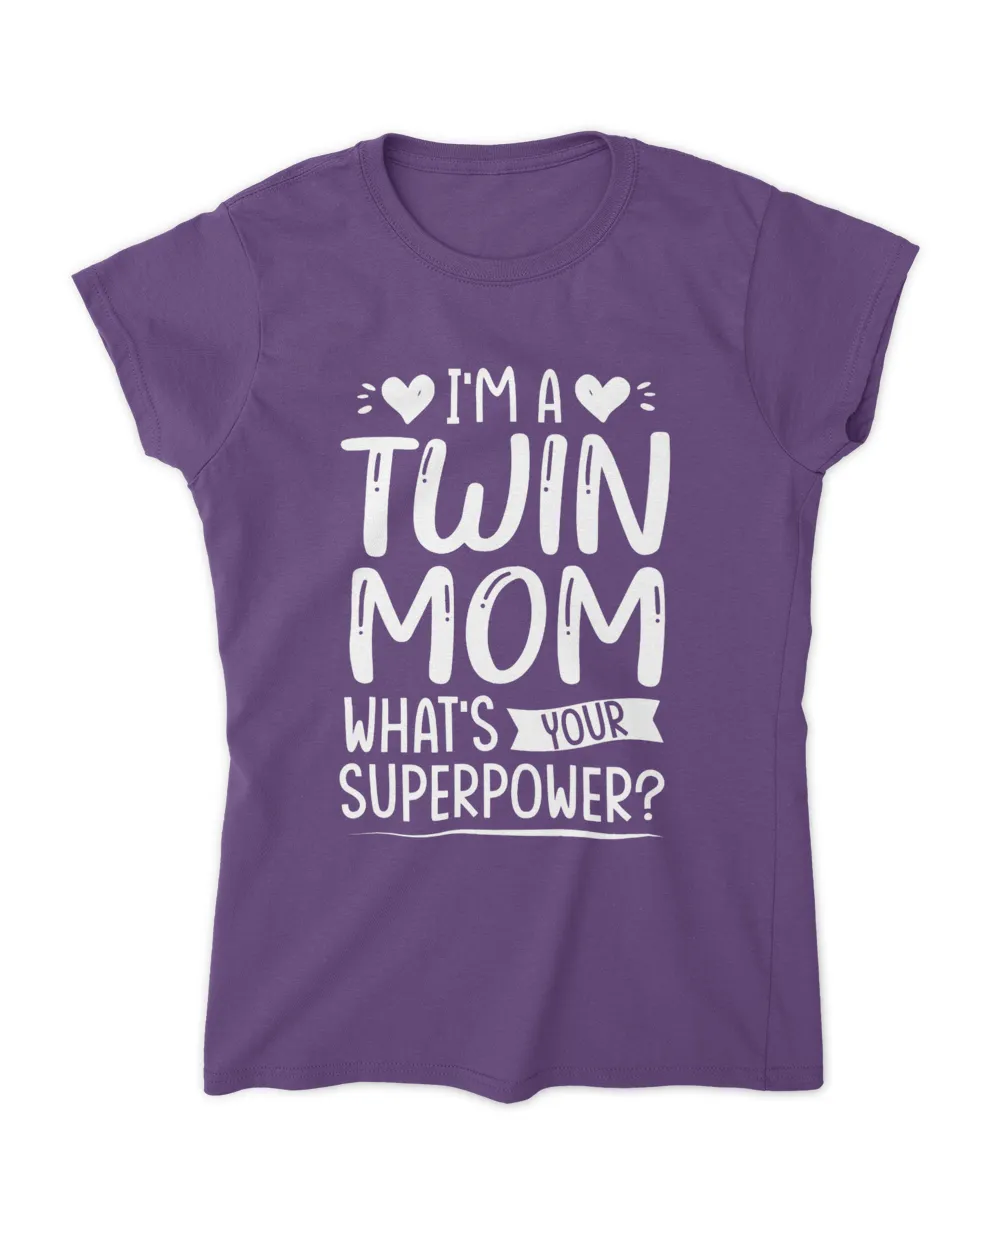 Twin Mom, What's your Super power? Family T-Shirt, Hoodie, Kids T-Shirt, Toodle & Infant Shirt, Gifts for your Mom